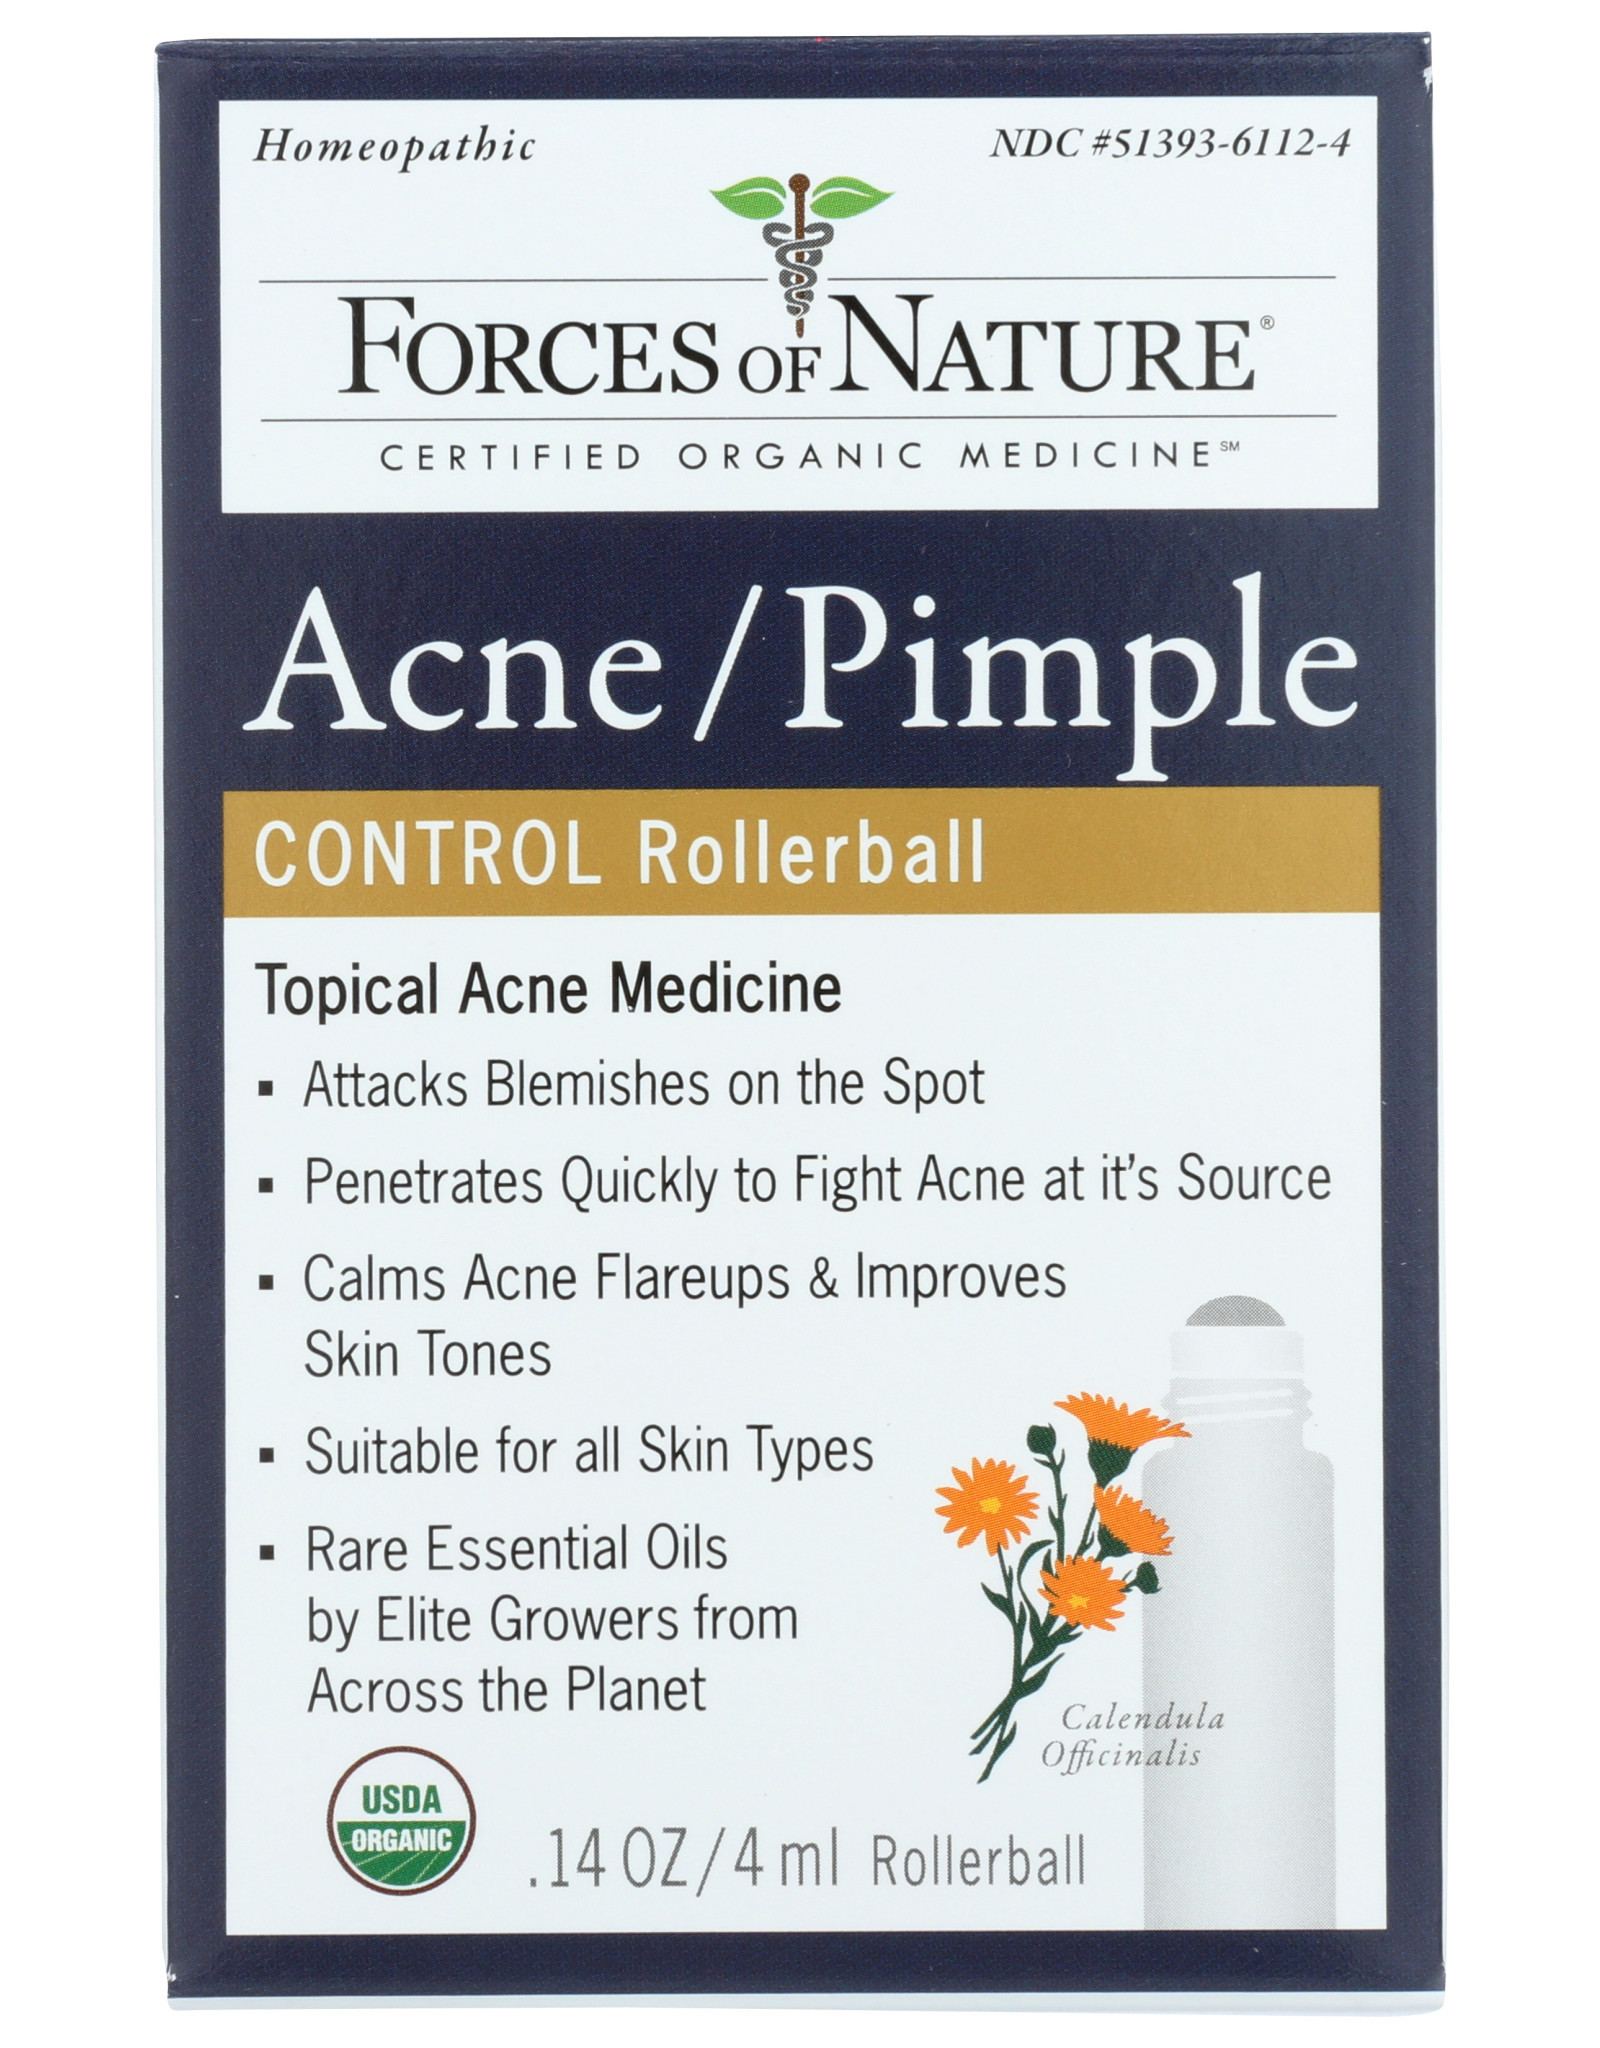 FORCES OF NATURE FORCES OF NATURE ACNE/PIMPLE ROLLERBALL APPLICATOR, 0.14 OZ.